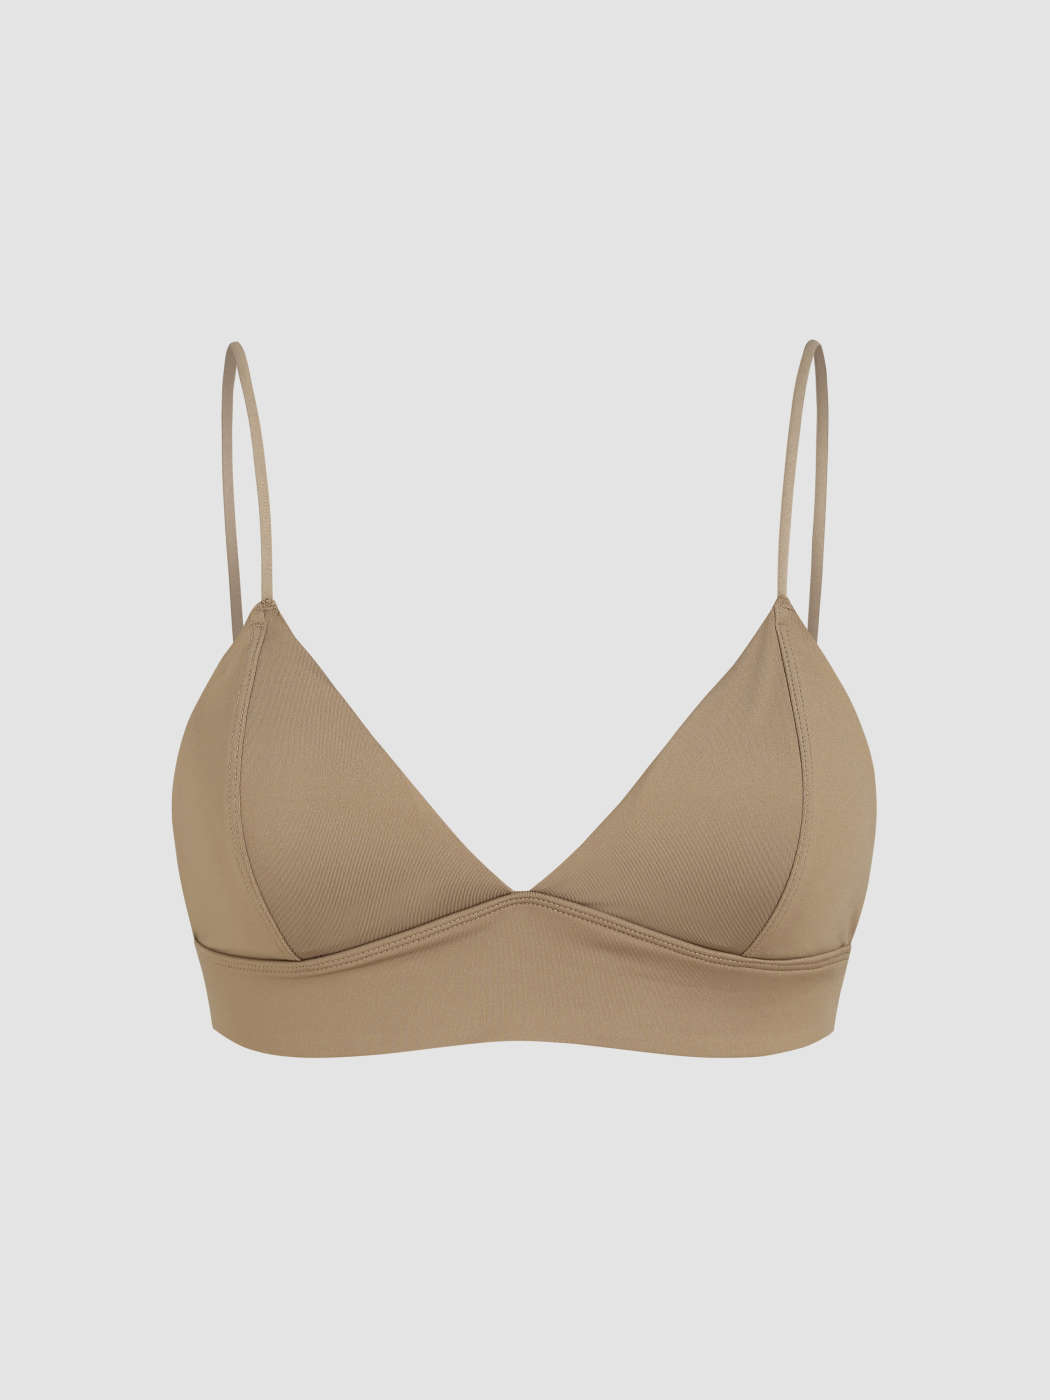 FITS EVERYBODY TRIANGLE BRALETTE | COCOA